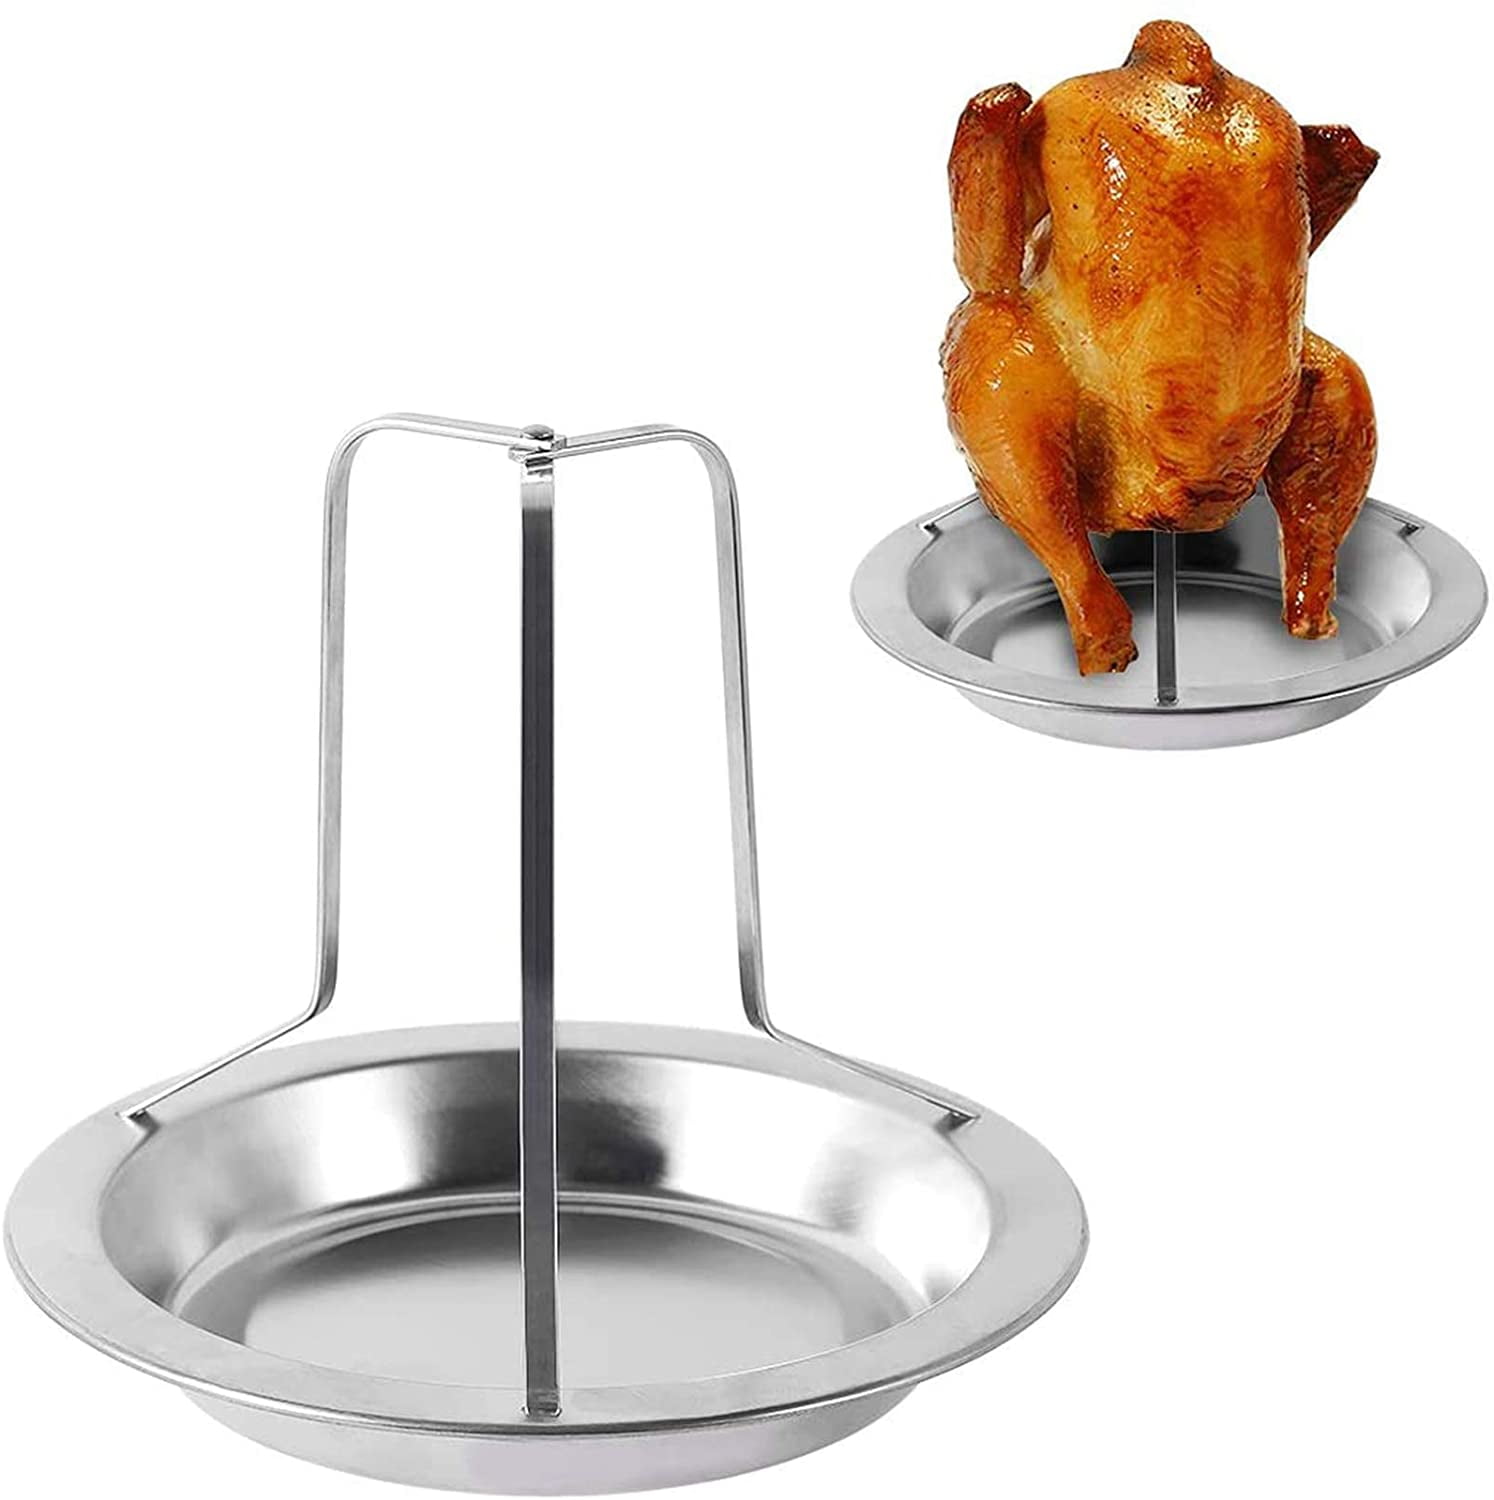 Roast Chicken Holder Stainless Steel Upright Roaster Rack BBQ Stand Grilled Pan 